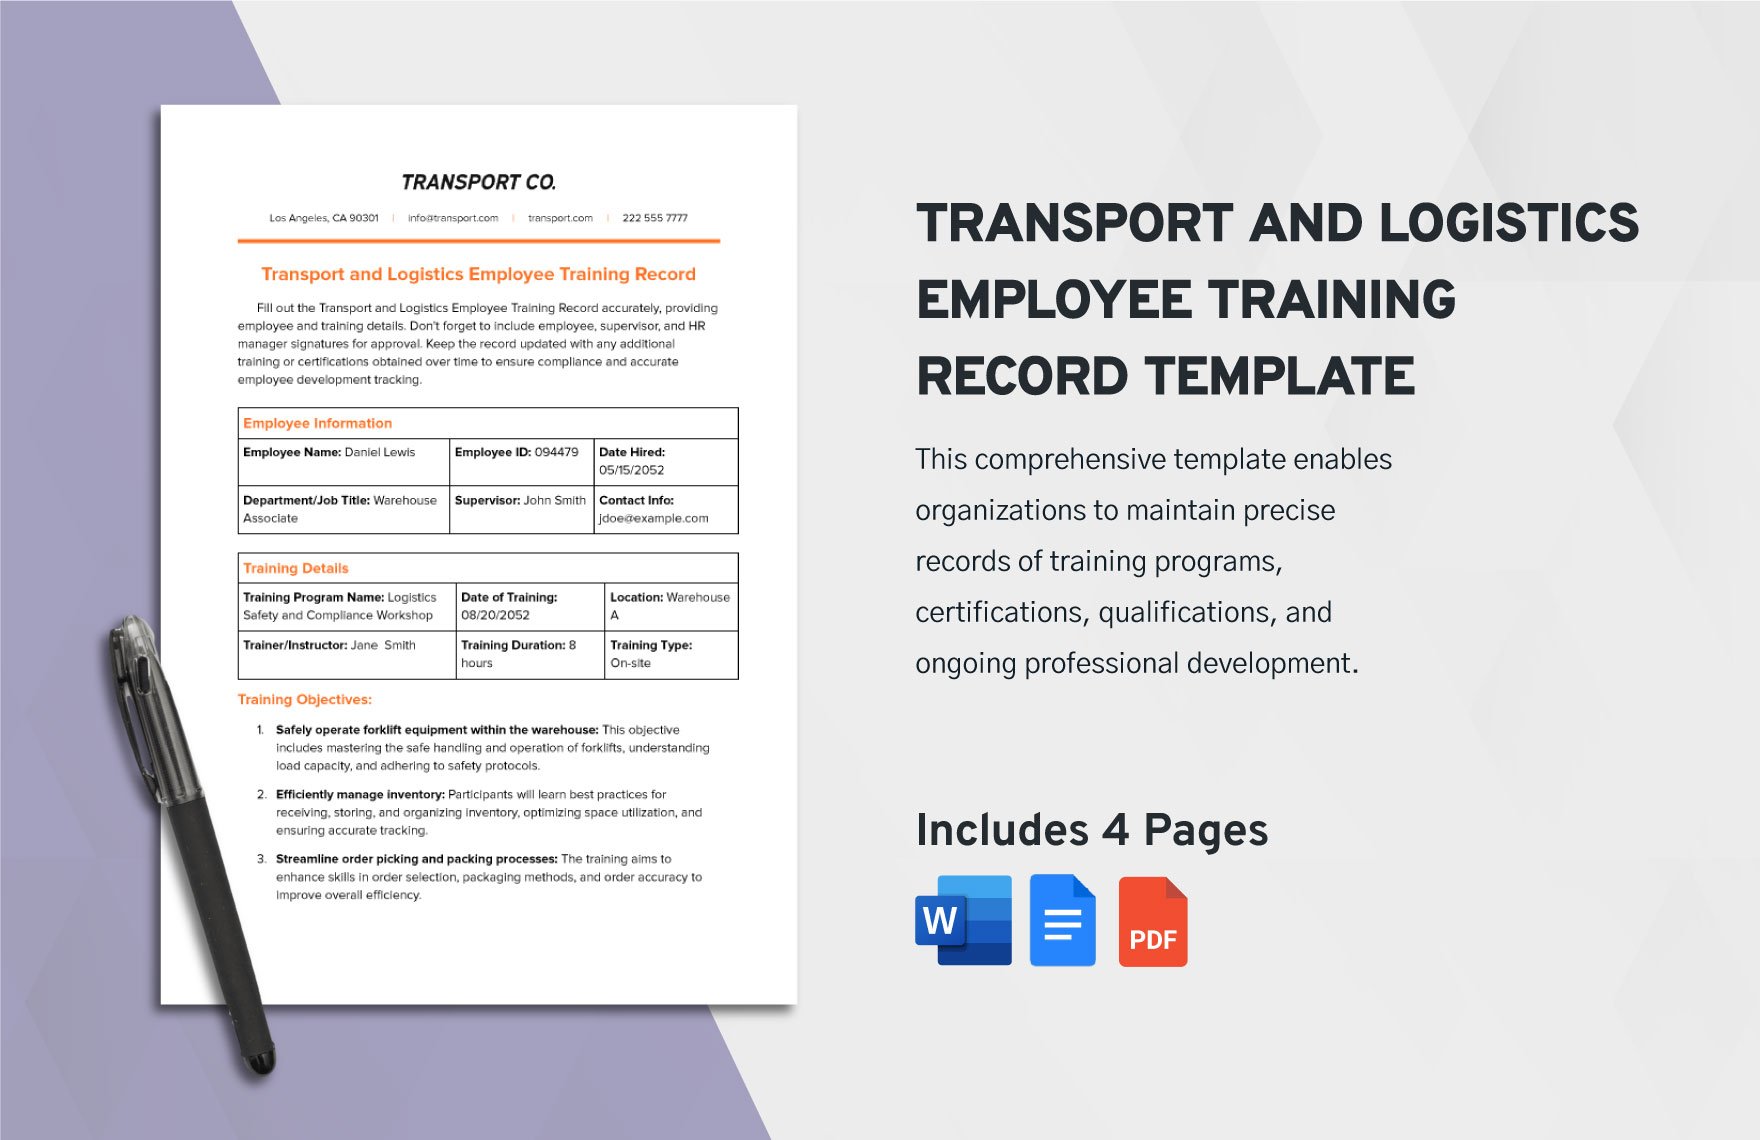 Transport and Logistics Employee Training Record Template